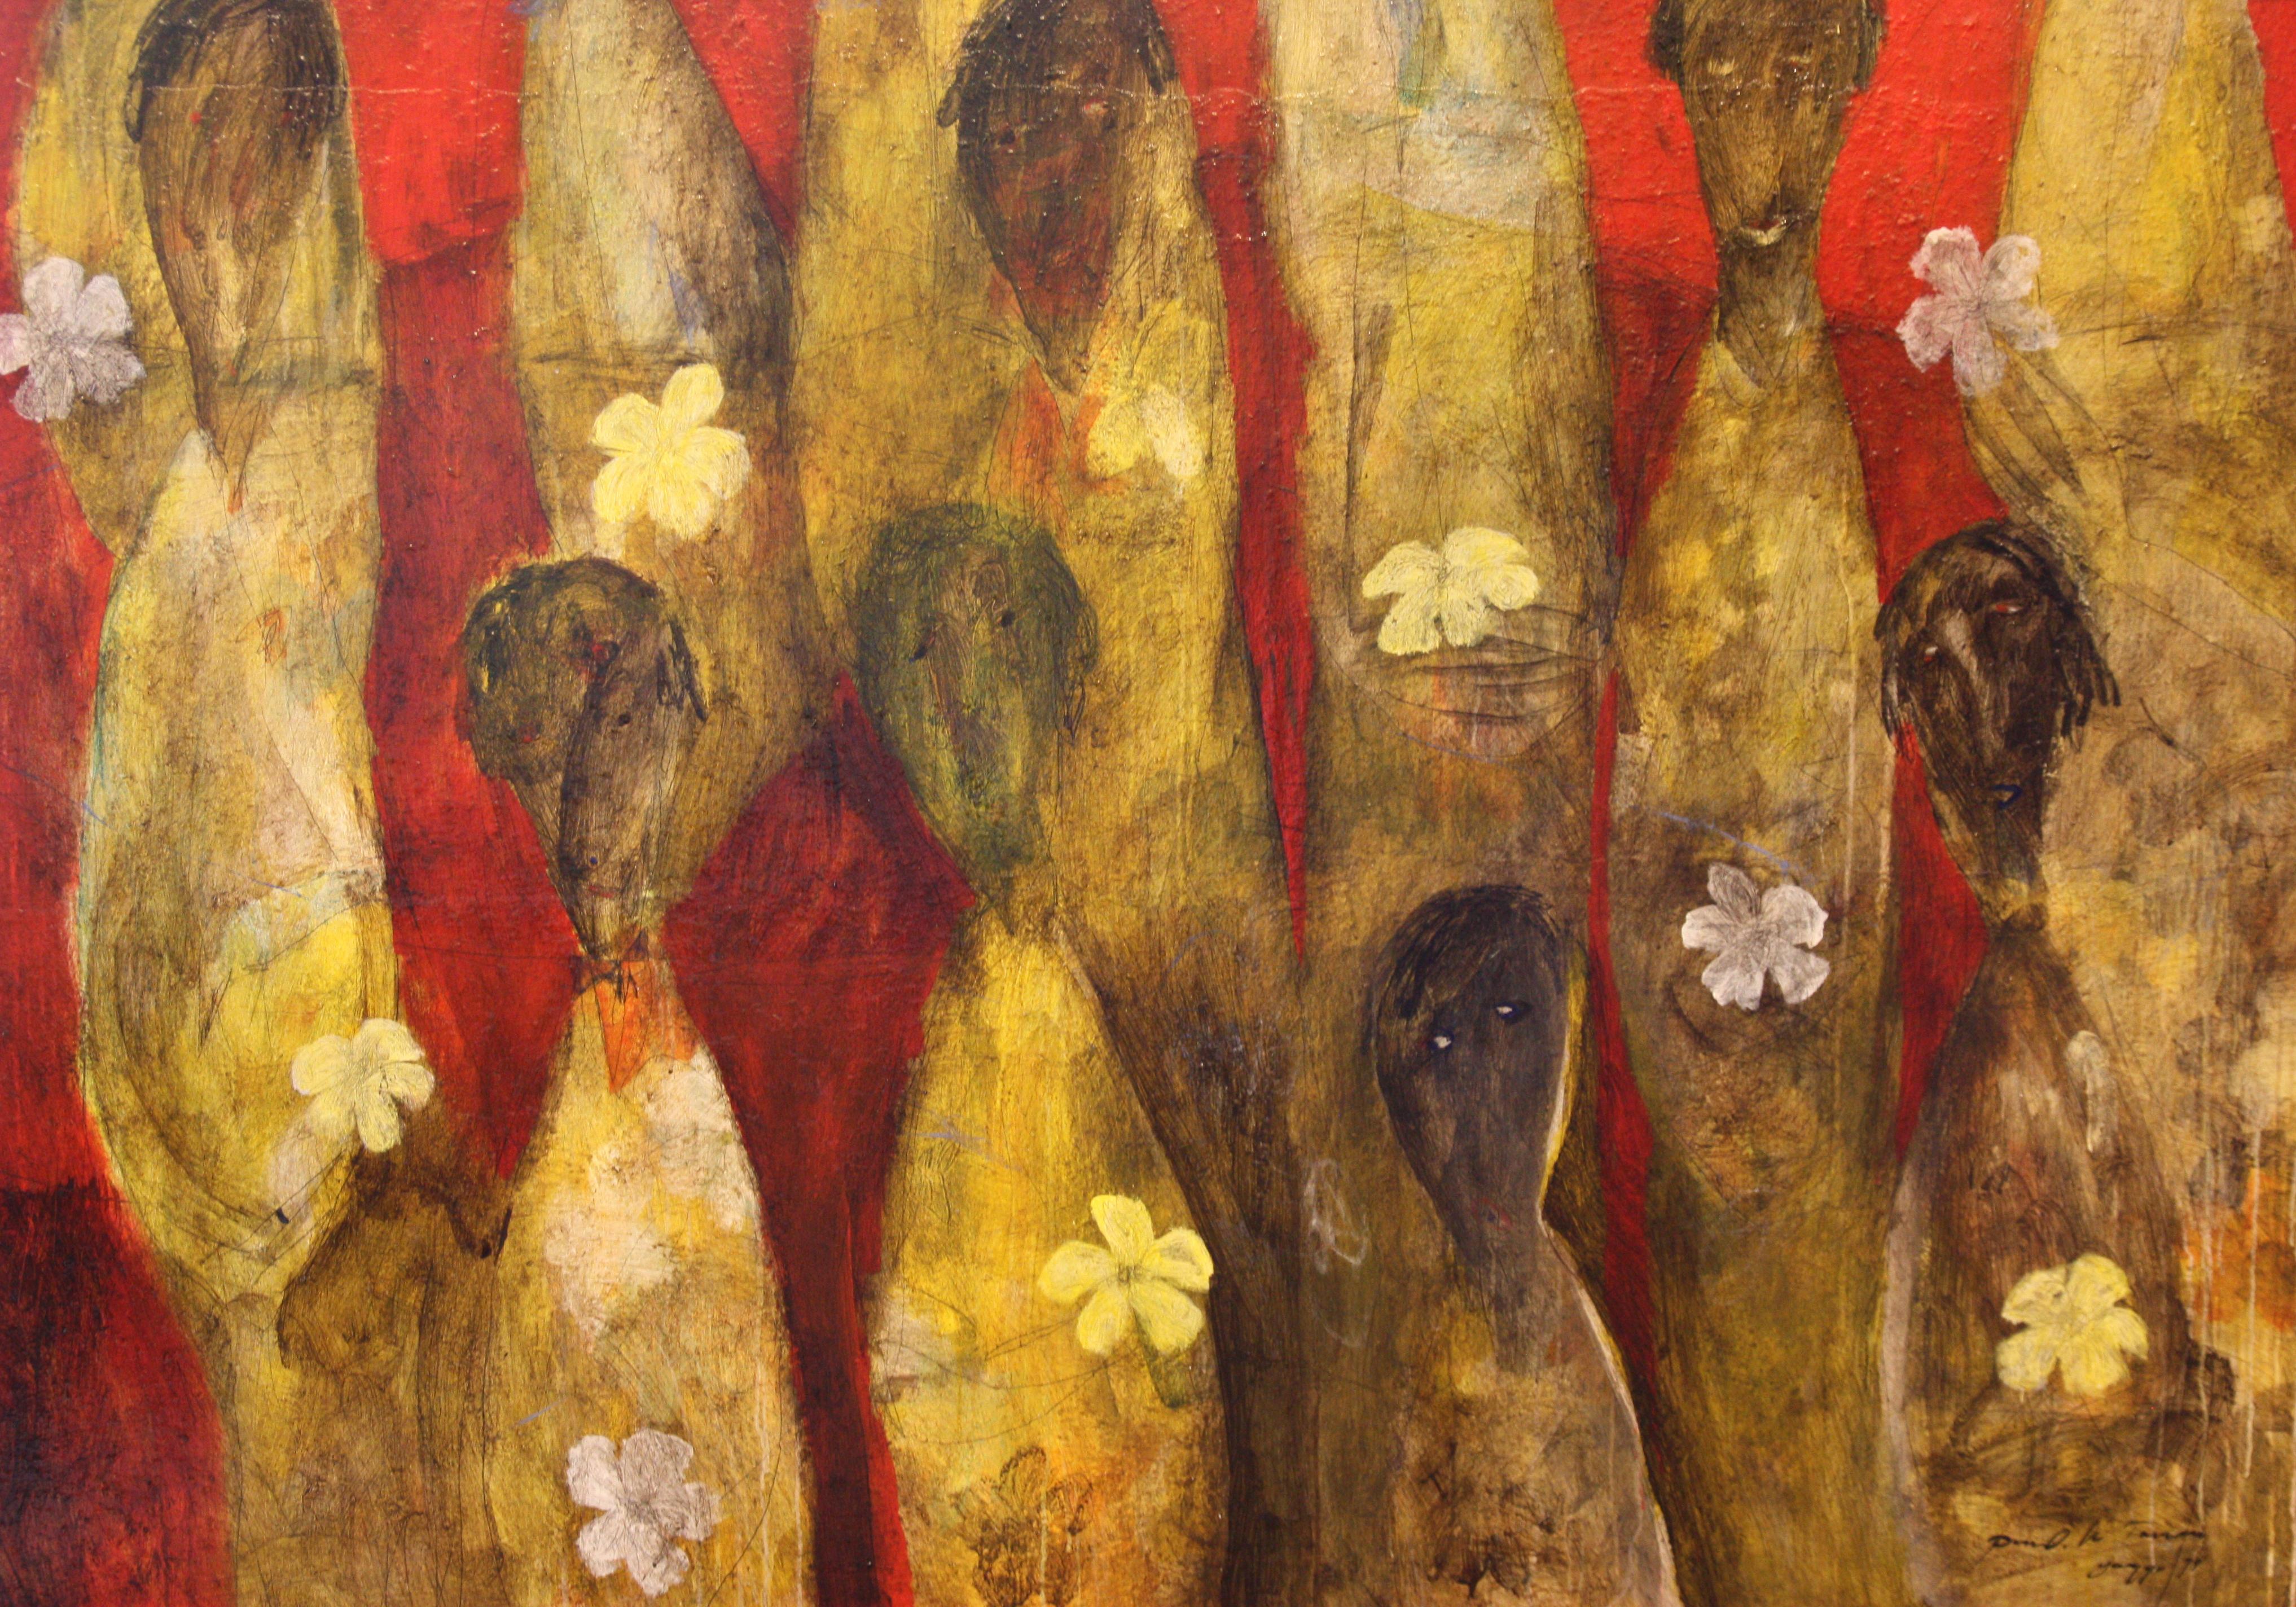 A large, framed, oil painting on canvas.   Black and white figures with yellow garments, holding flowers on a red background.  Brushing, scratching and several other techniques used.  Signed, dated and titled in the bottom right corner.  